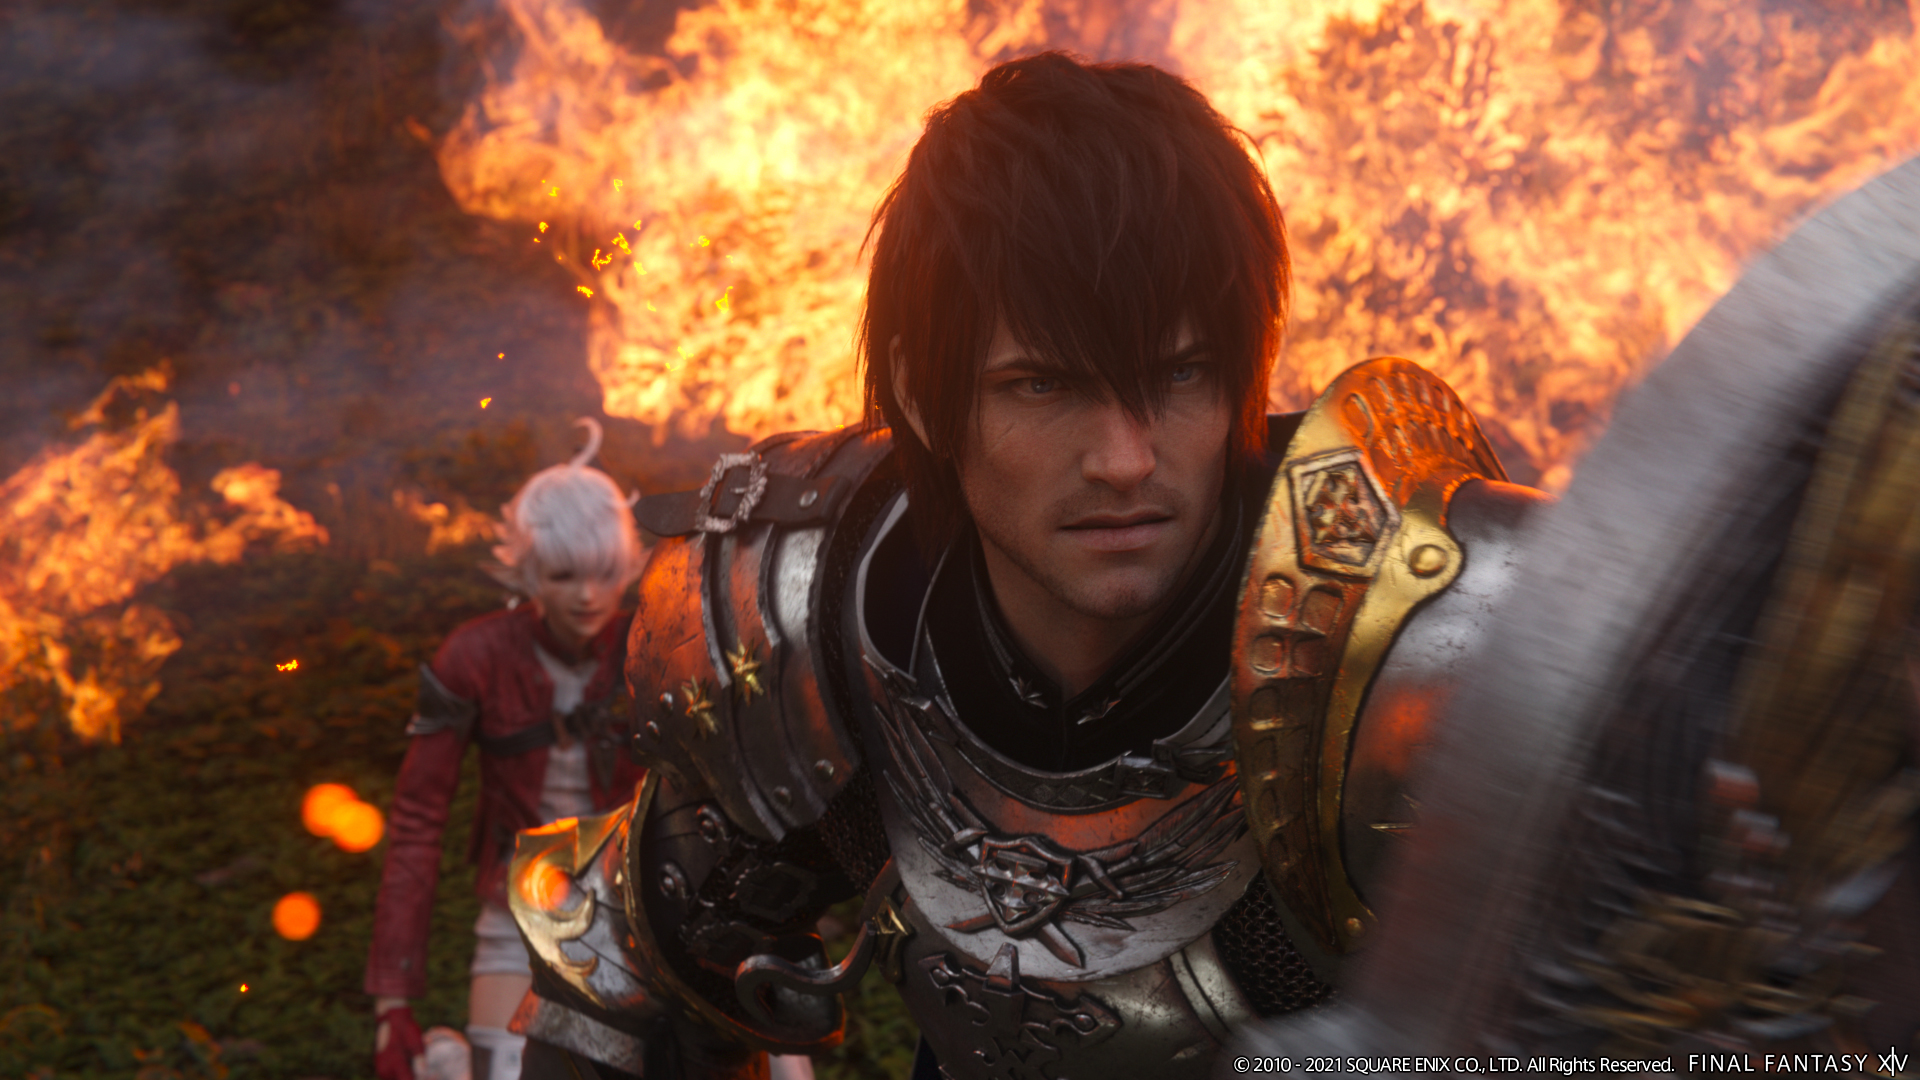 Final Fantasy 14 goes back on digital sale later this month thumbnail